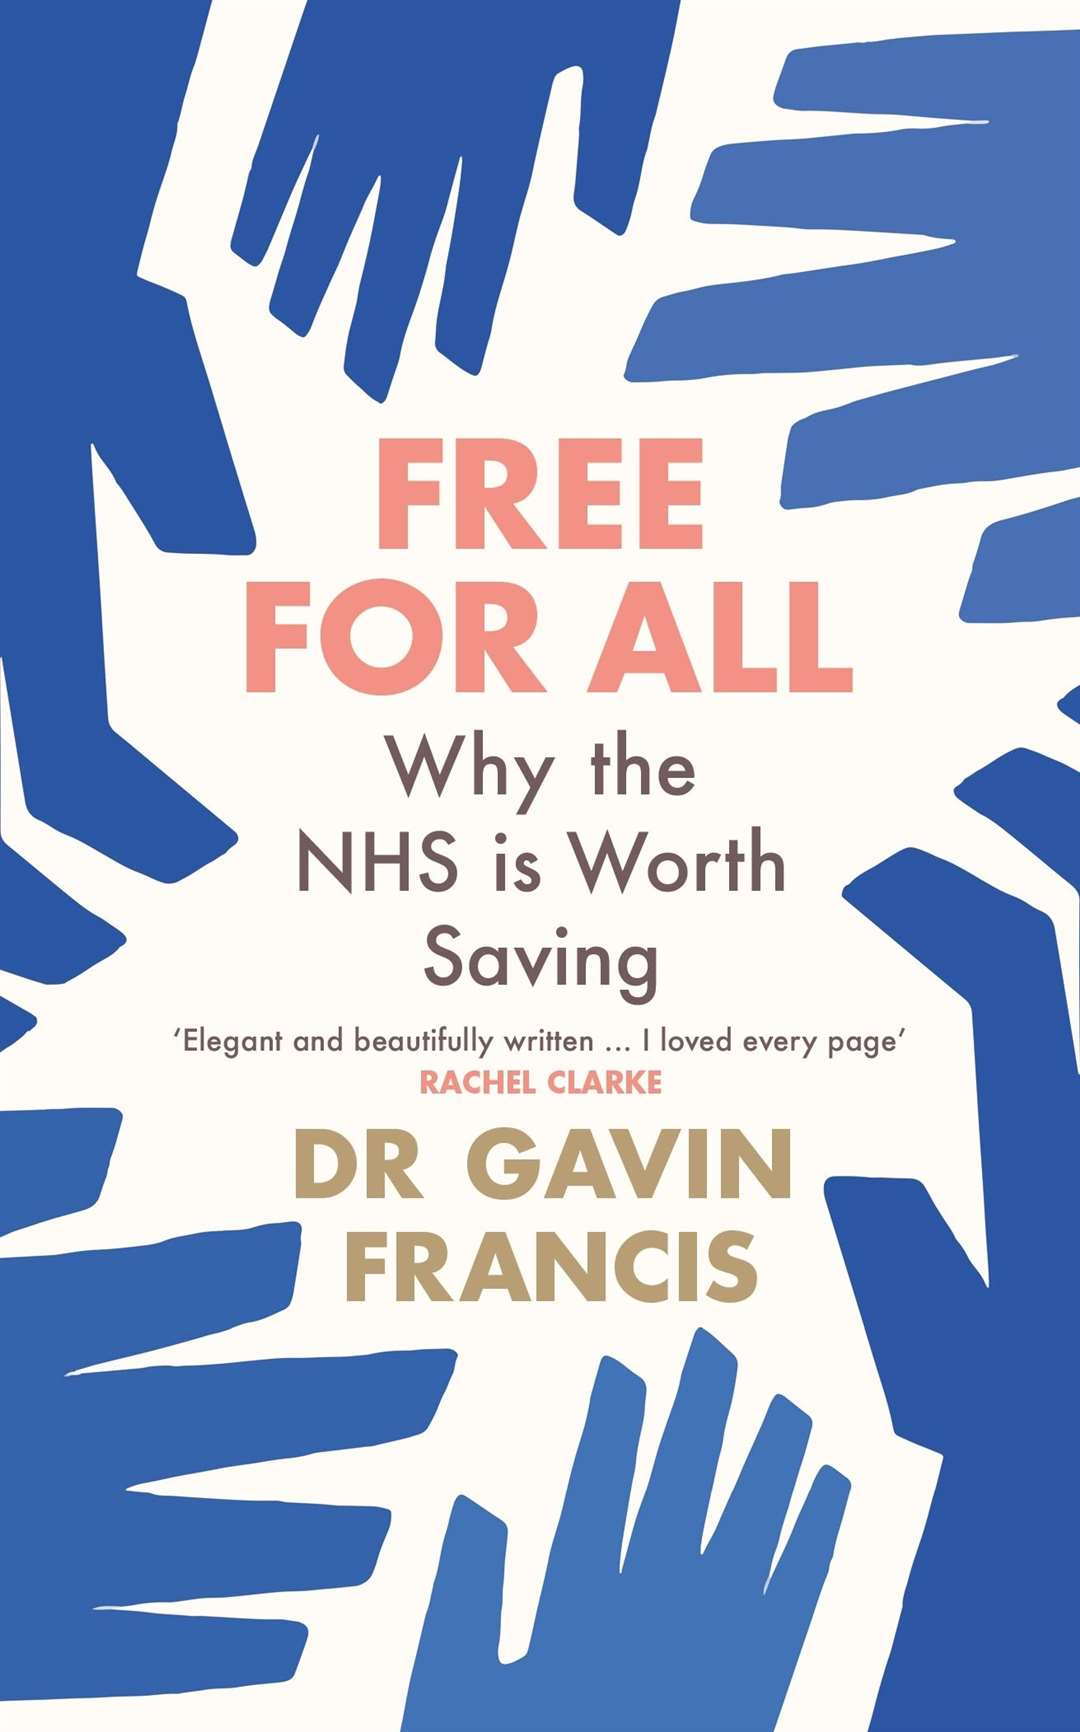 Free for All: Why the NHS is Worth Saving.